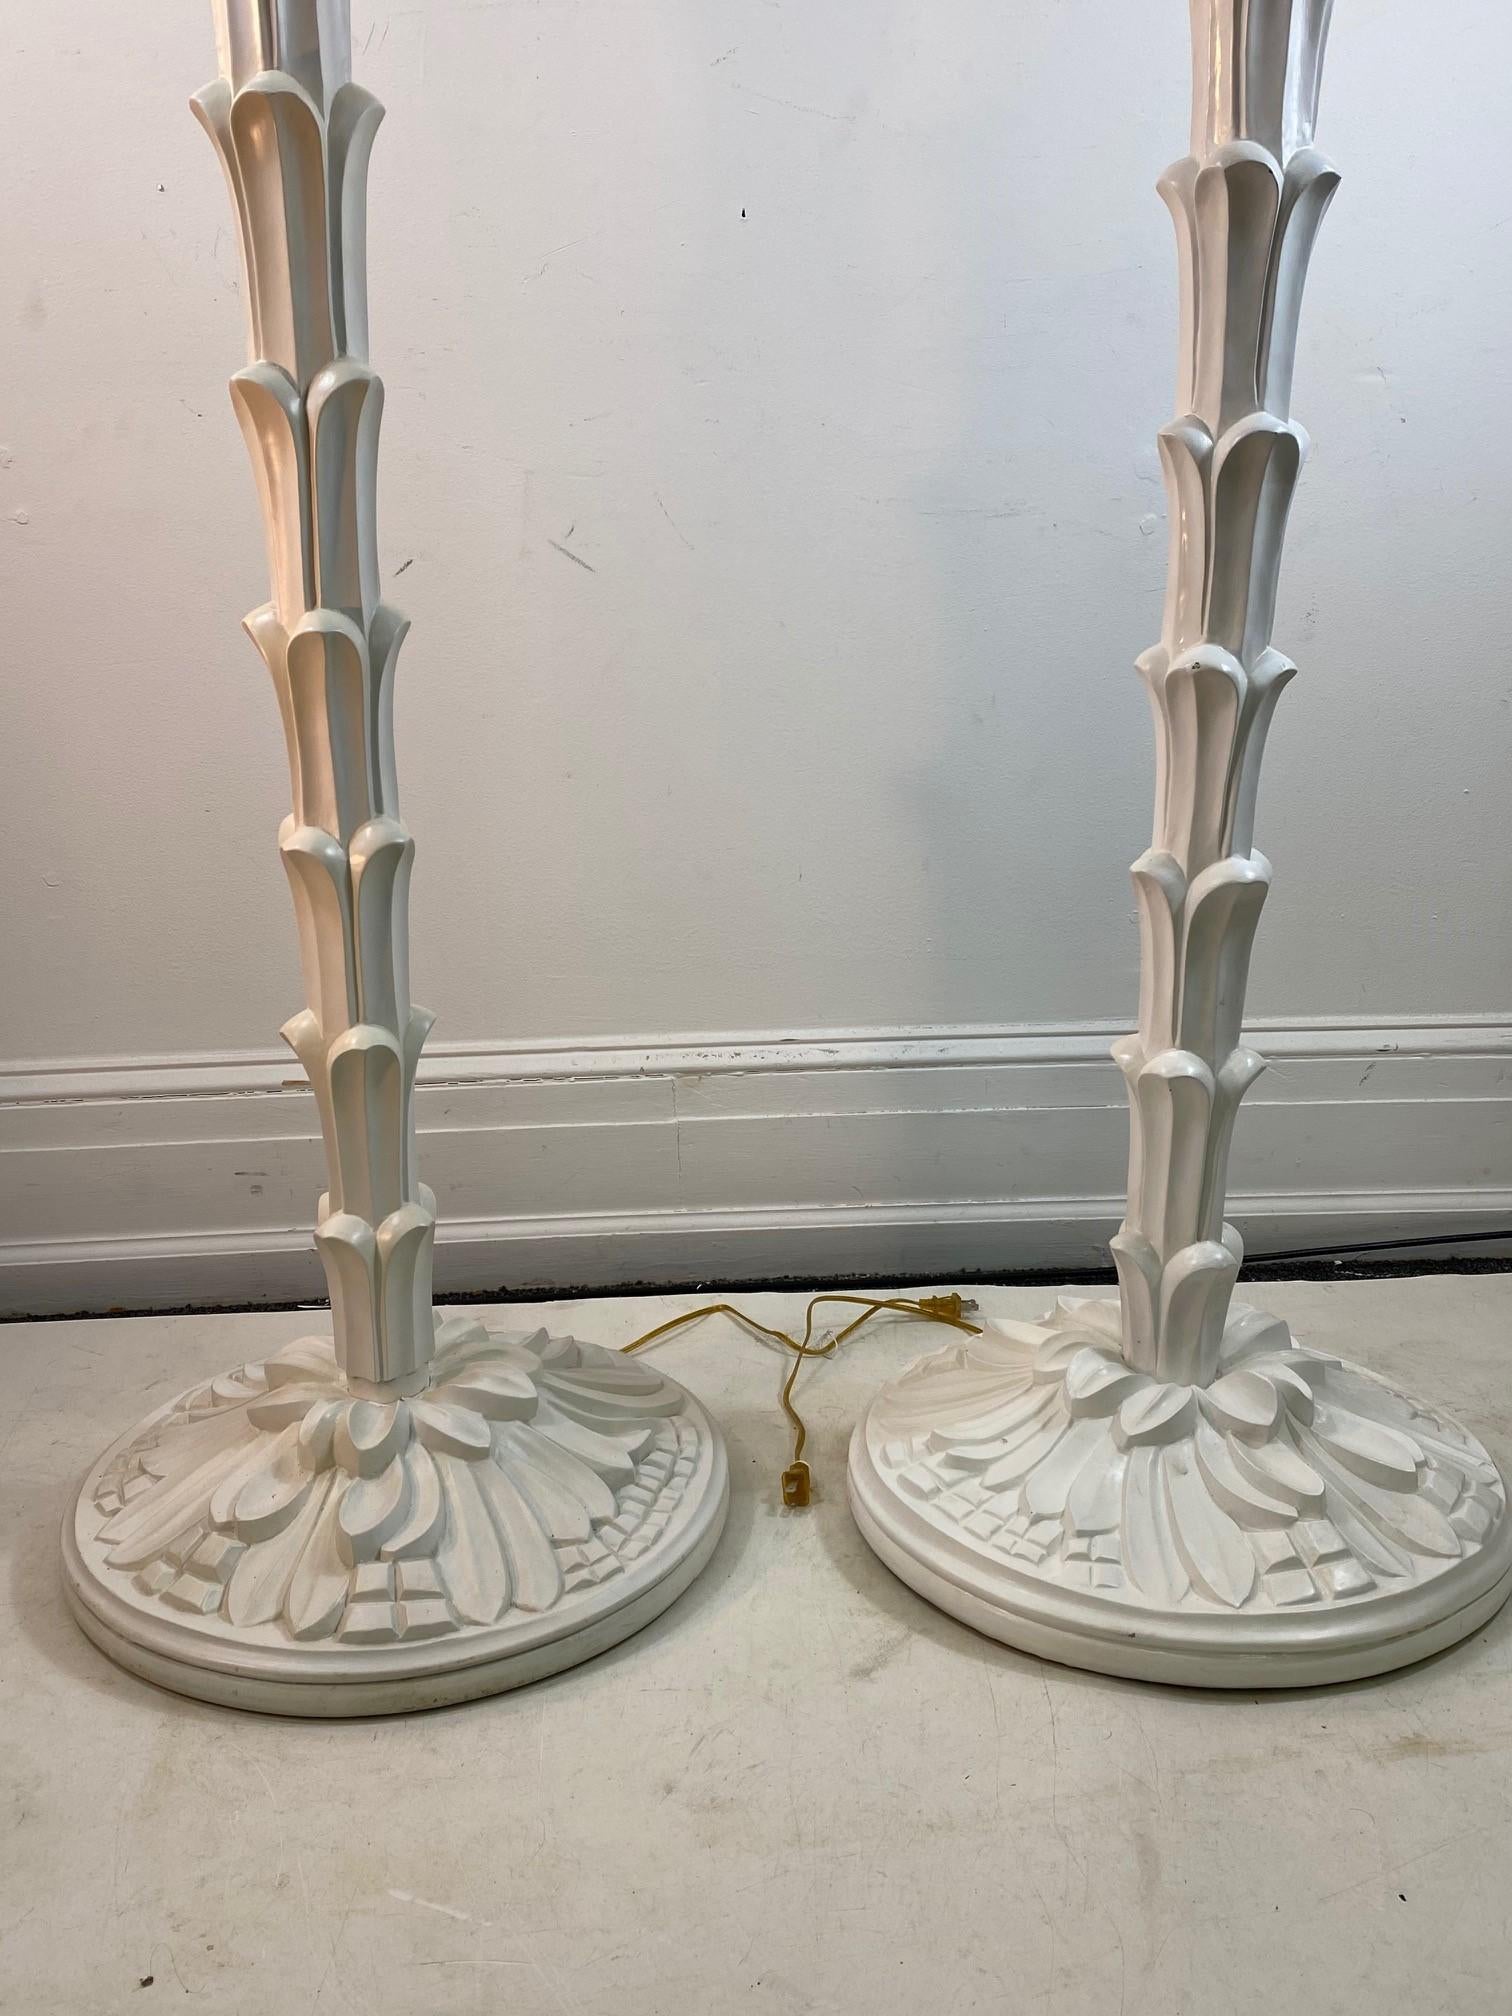 French Modern torchère floor lamps in the style of Serge Roche. The pair is handmade of carved and painted wood and was made in the early 21st century. In great vintage condition with age-appropriate wear and use.